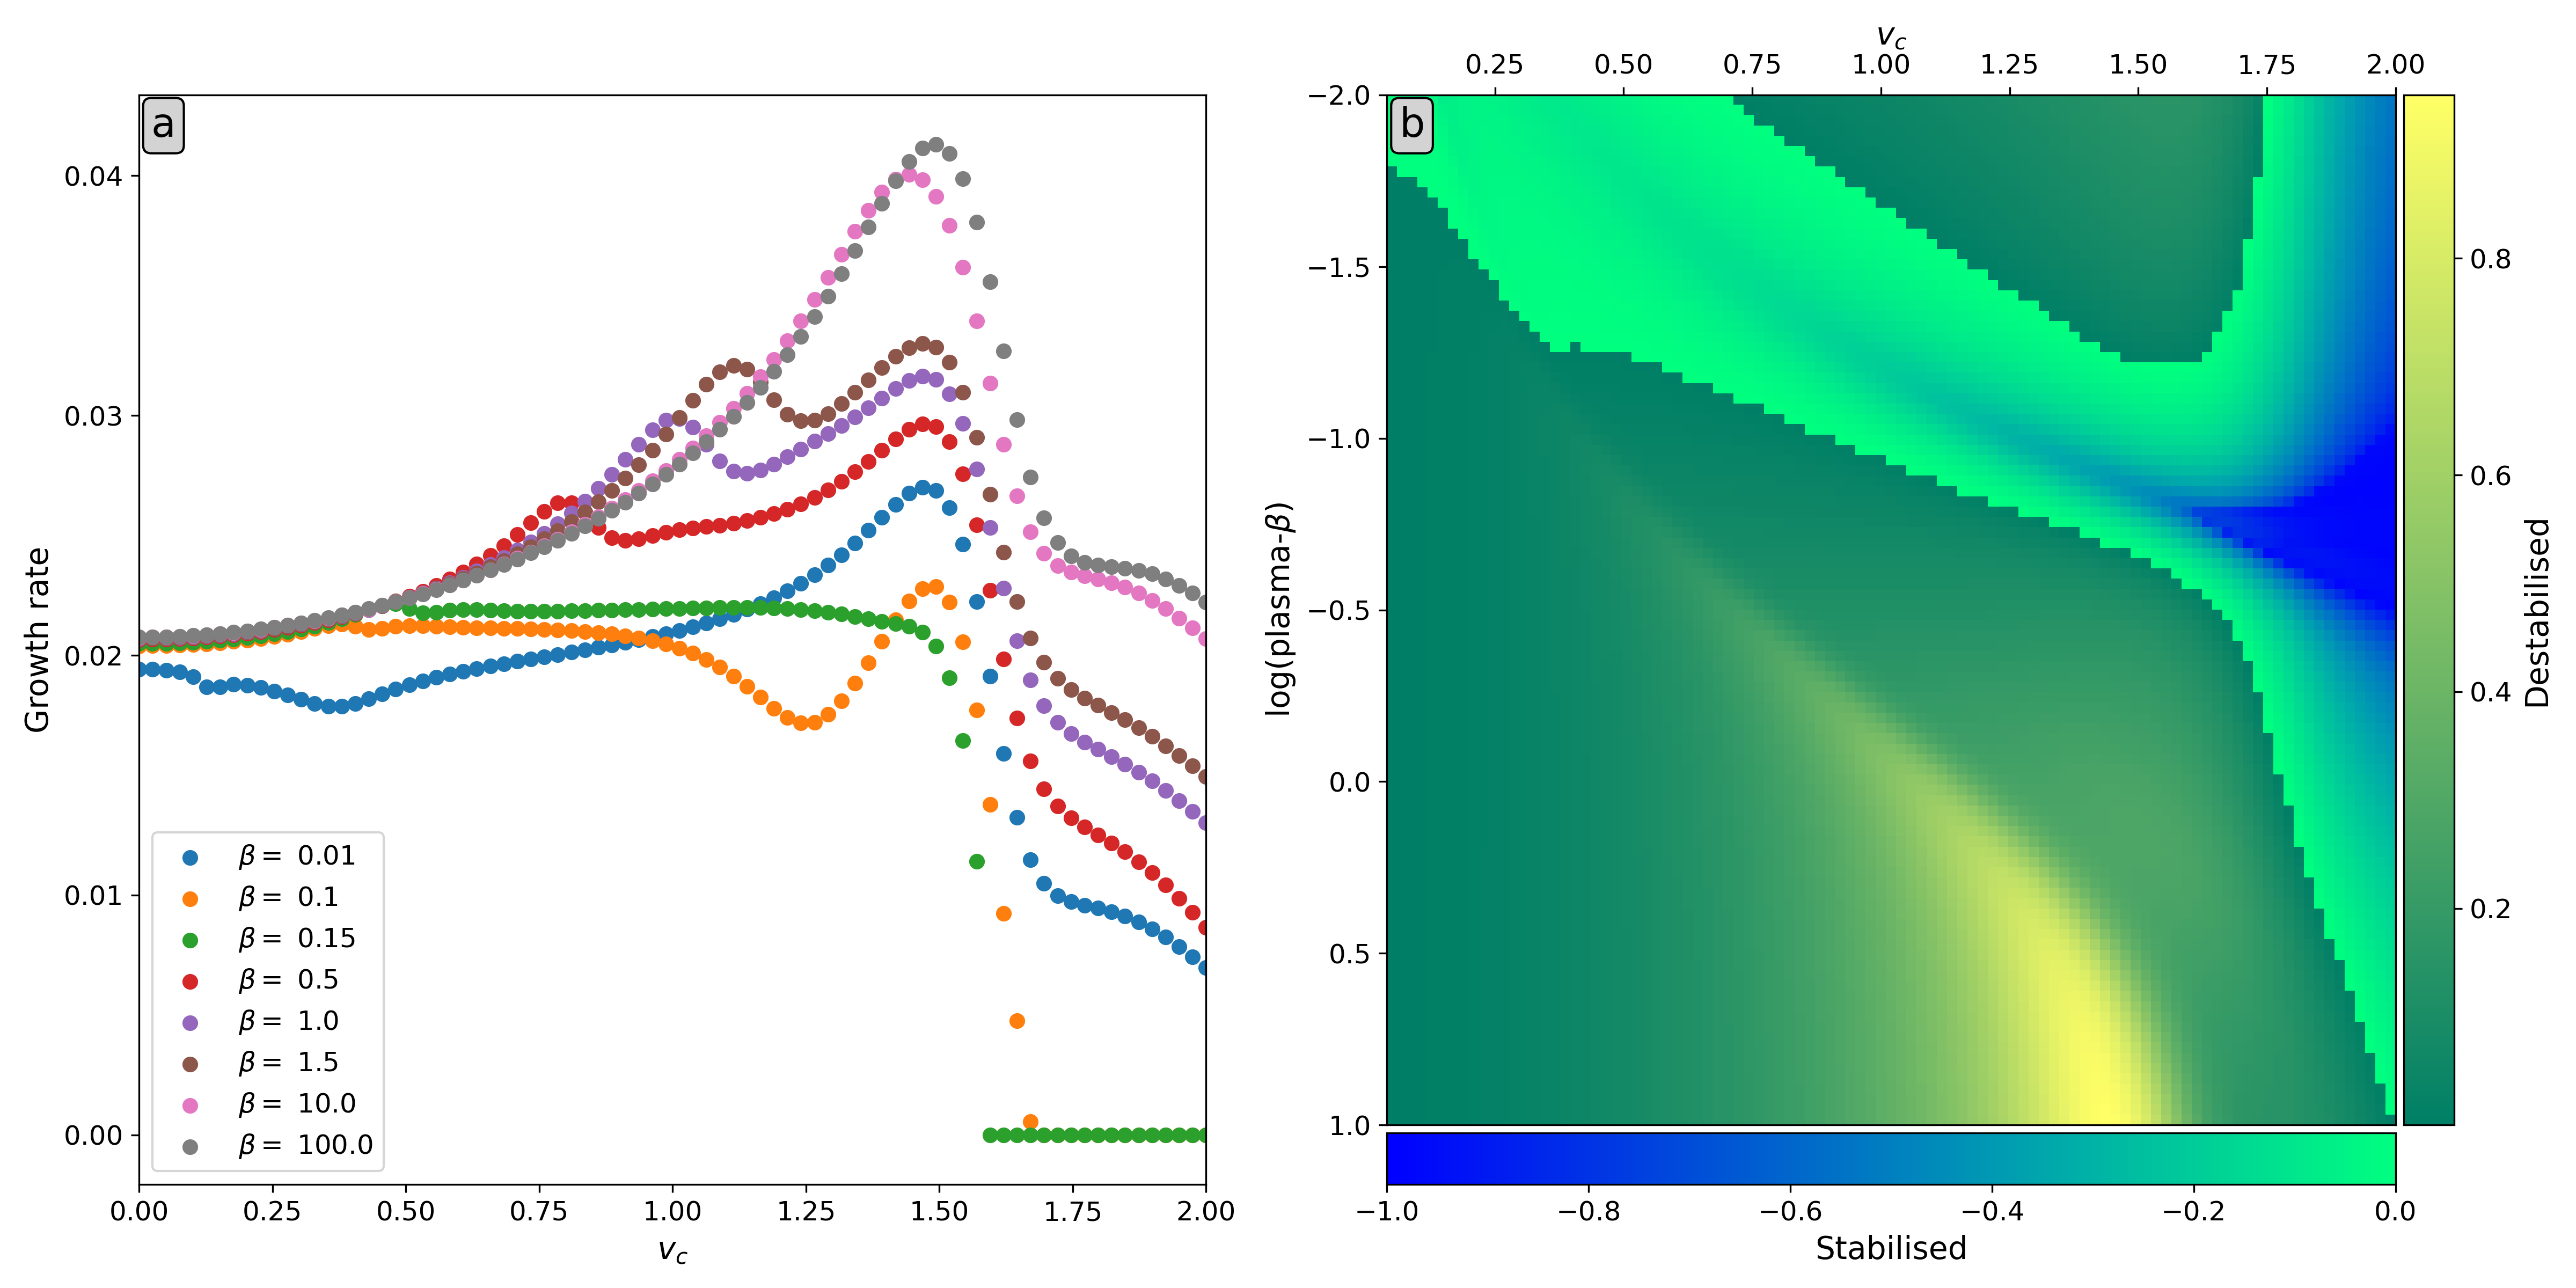 Legolas multiruns reveal how the tearing growth rate is affected in an intricate way by the combination of velocity coefficient and plasma-beta for a plasma slab with a direction-varying magnetic field.